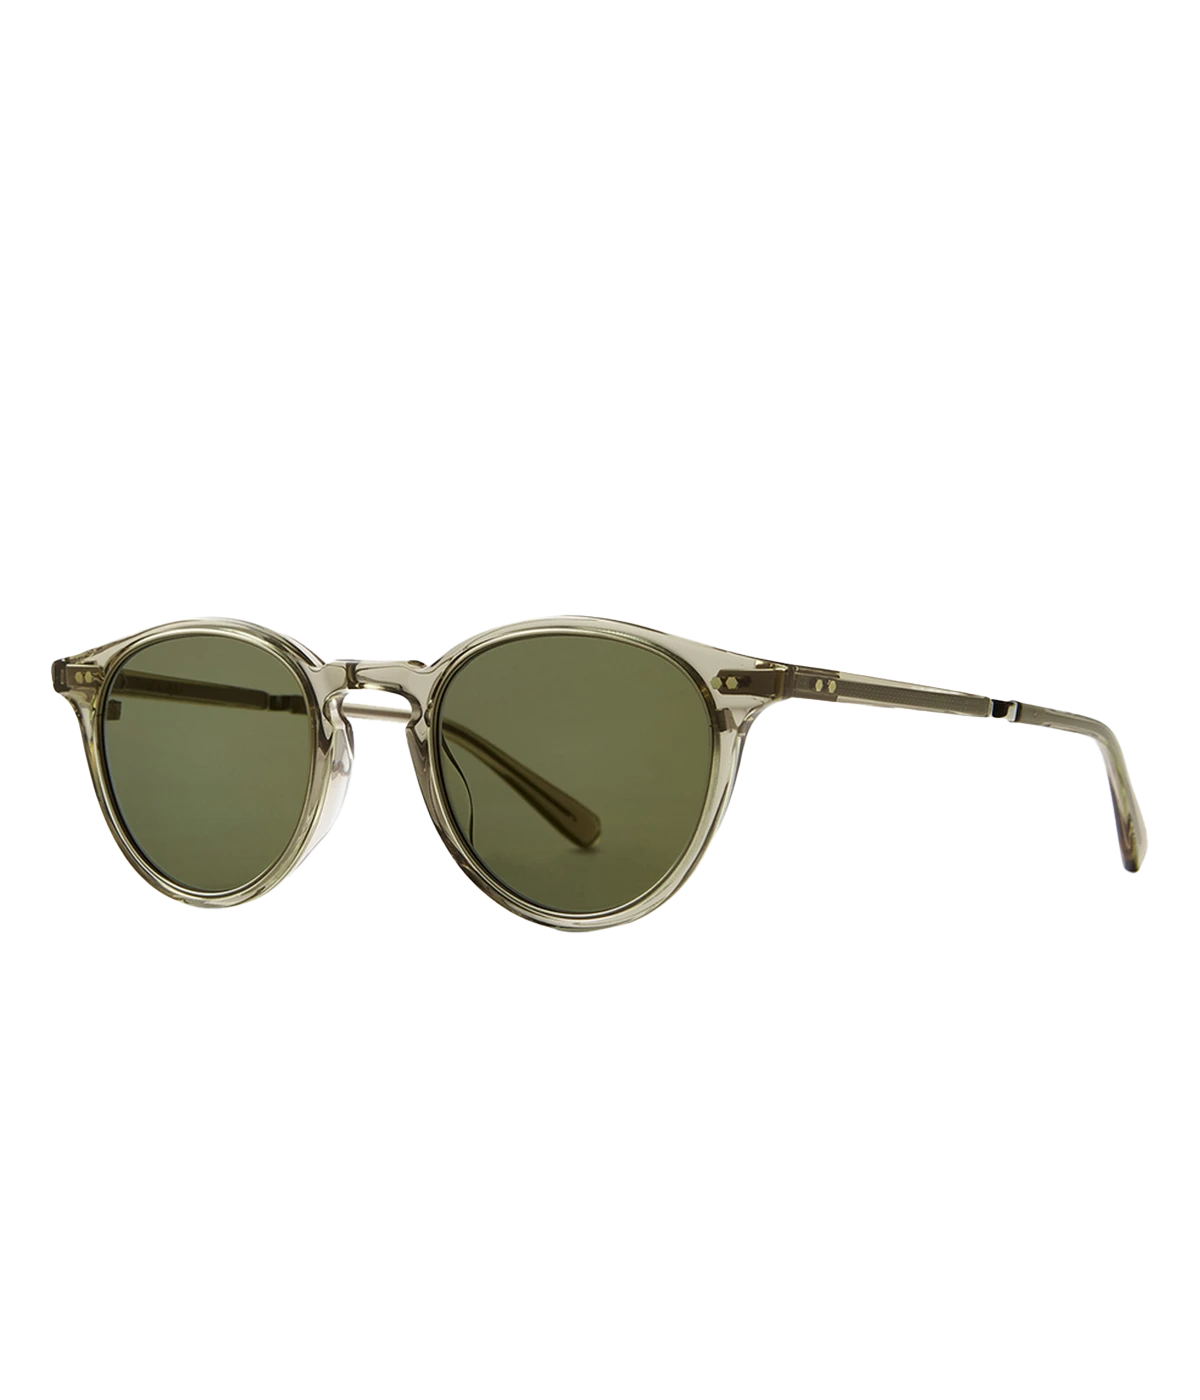 Marmont II S 48 Sunglasses in White, Gold & Green